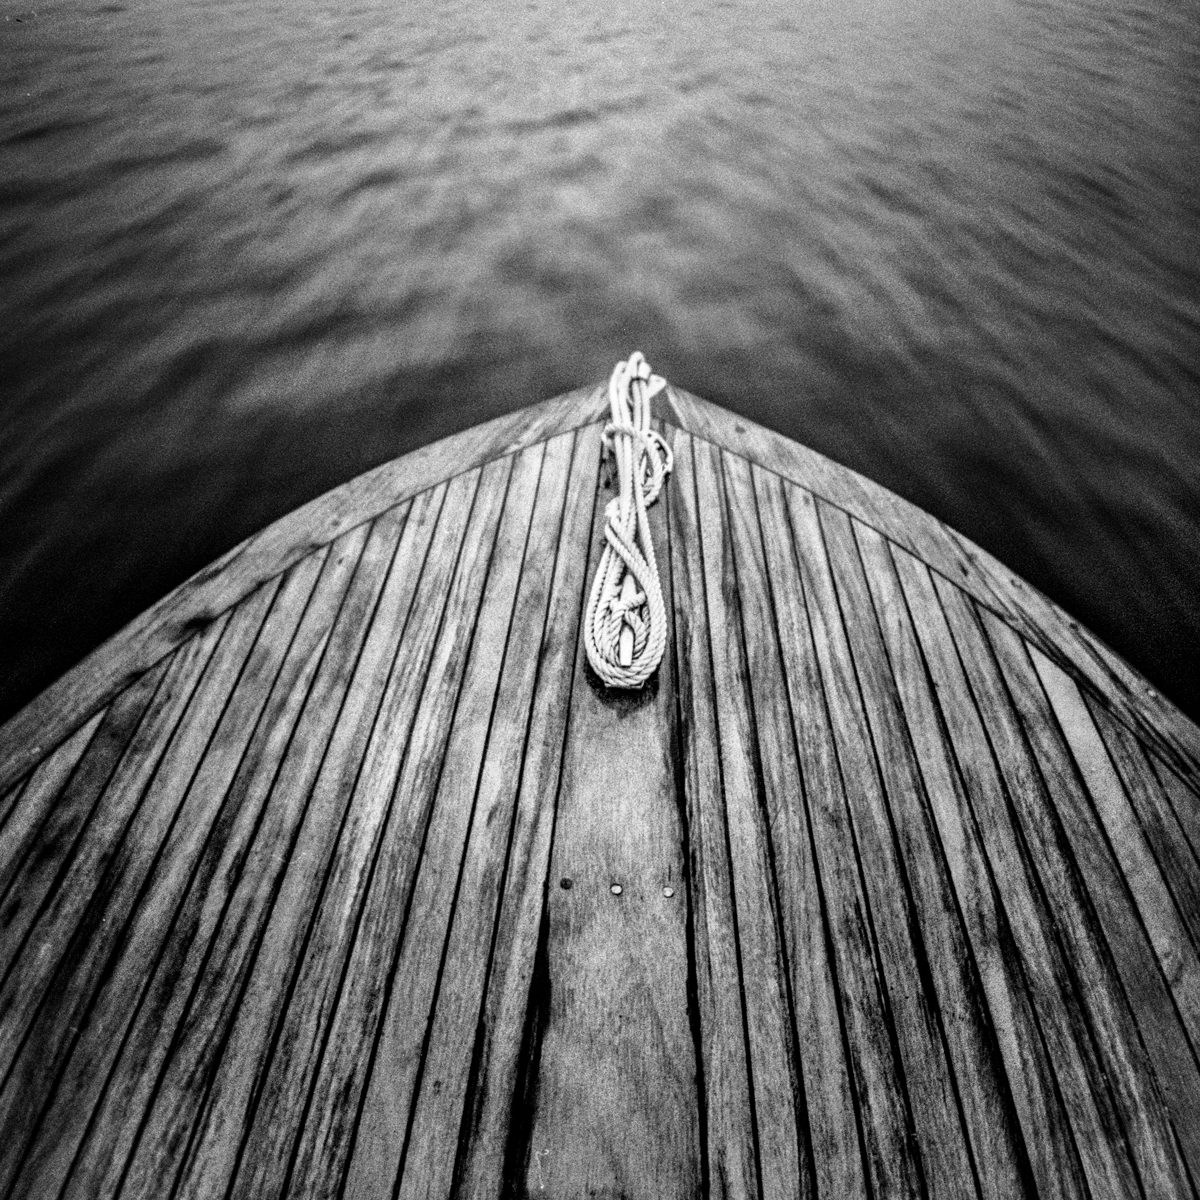 Speed: I'm fascinated by the sense of speed and often try to photograph it. This is a 15 knots view from my old speed boat. Shot with a Lomo LC-A 120 camera on Ilford HP5+ film. Developed in 1+50 Rodinal.